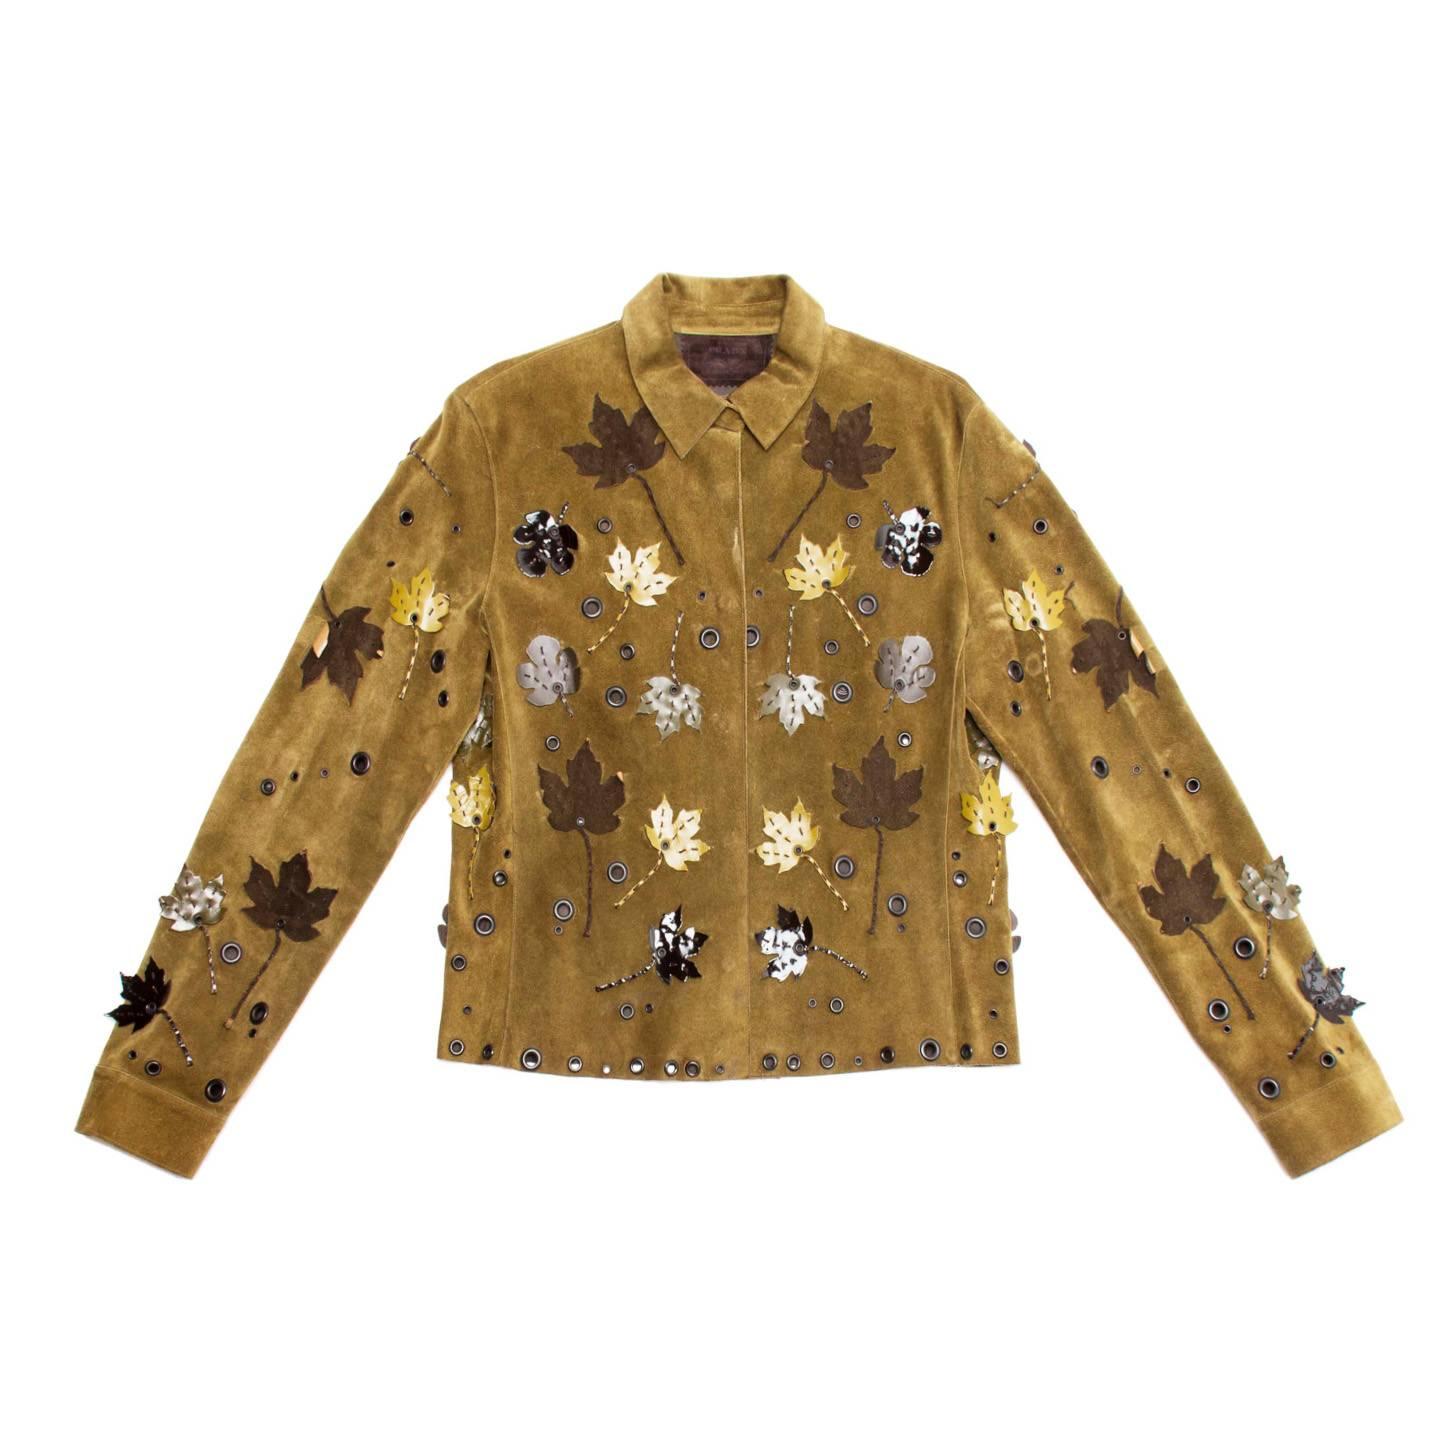 Collection piece musk green suede shirt jacket fully decorated with dark metal eyelets and leather leaves appliques. The jacket is not lined and it fastens at center front with hidden snap buttons, as well as the cuffs. The leaves appliques have